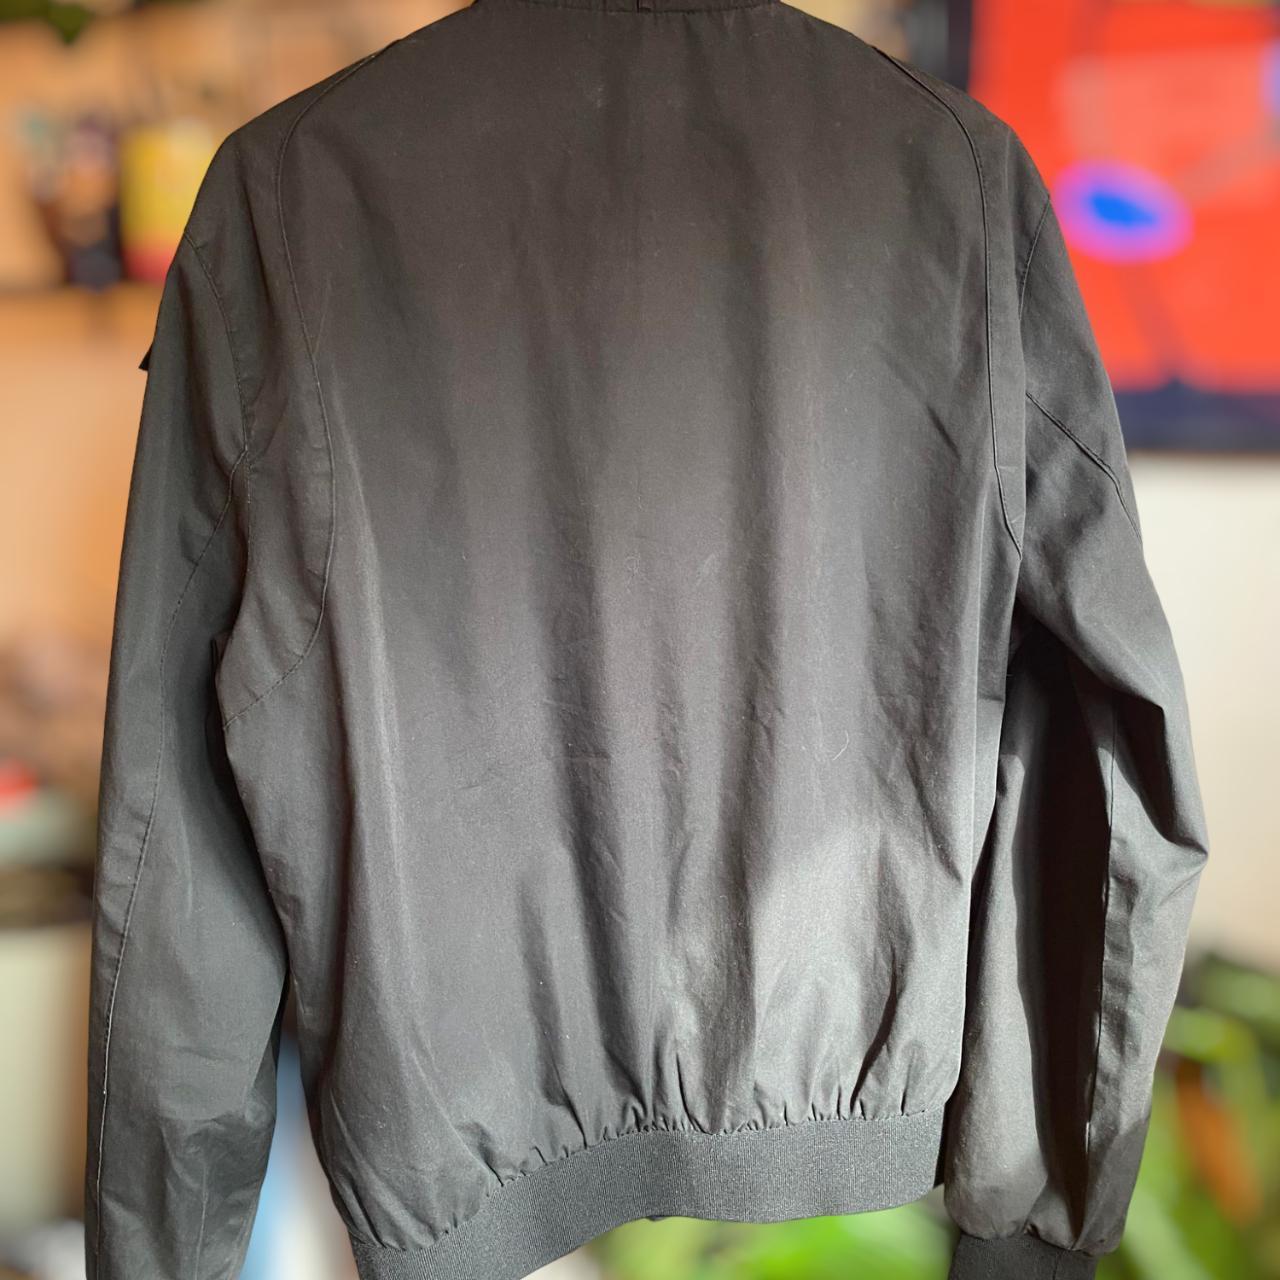 Members Only Classic Iconic Racer Jacket Black / Medium